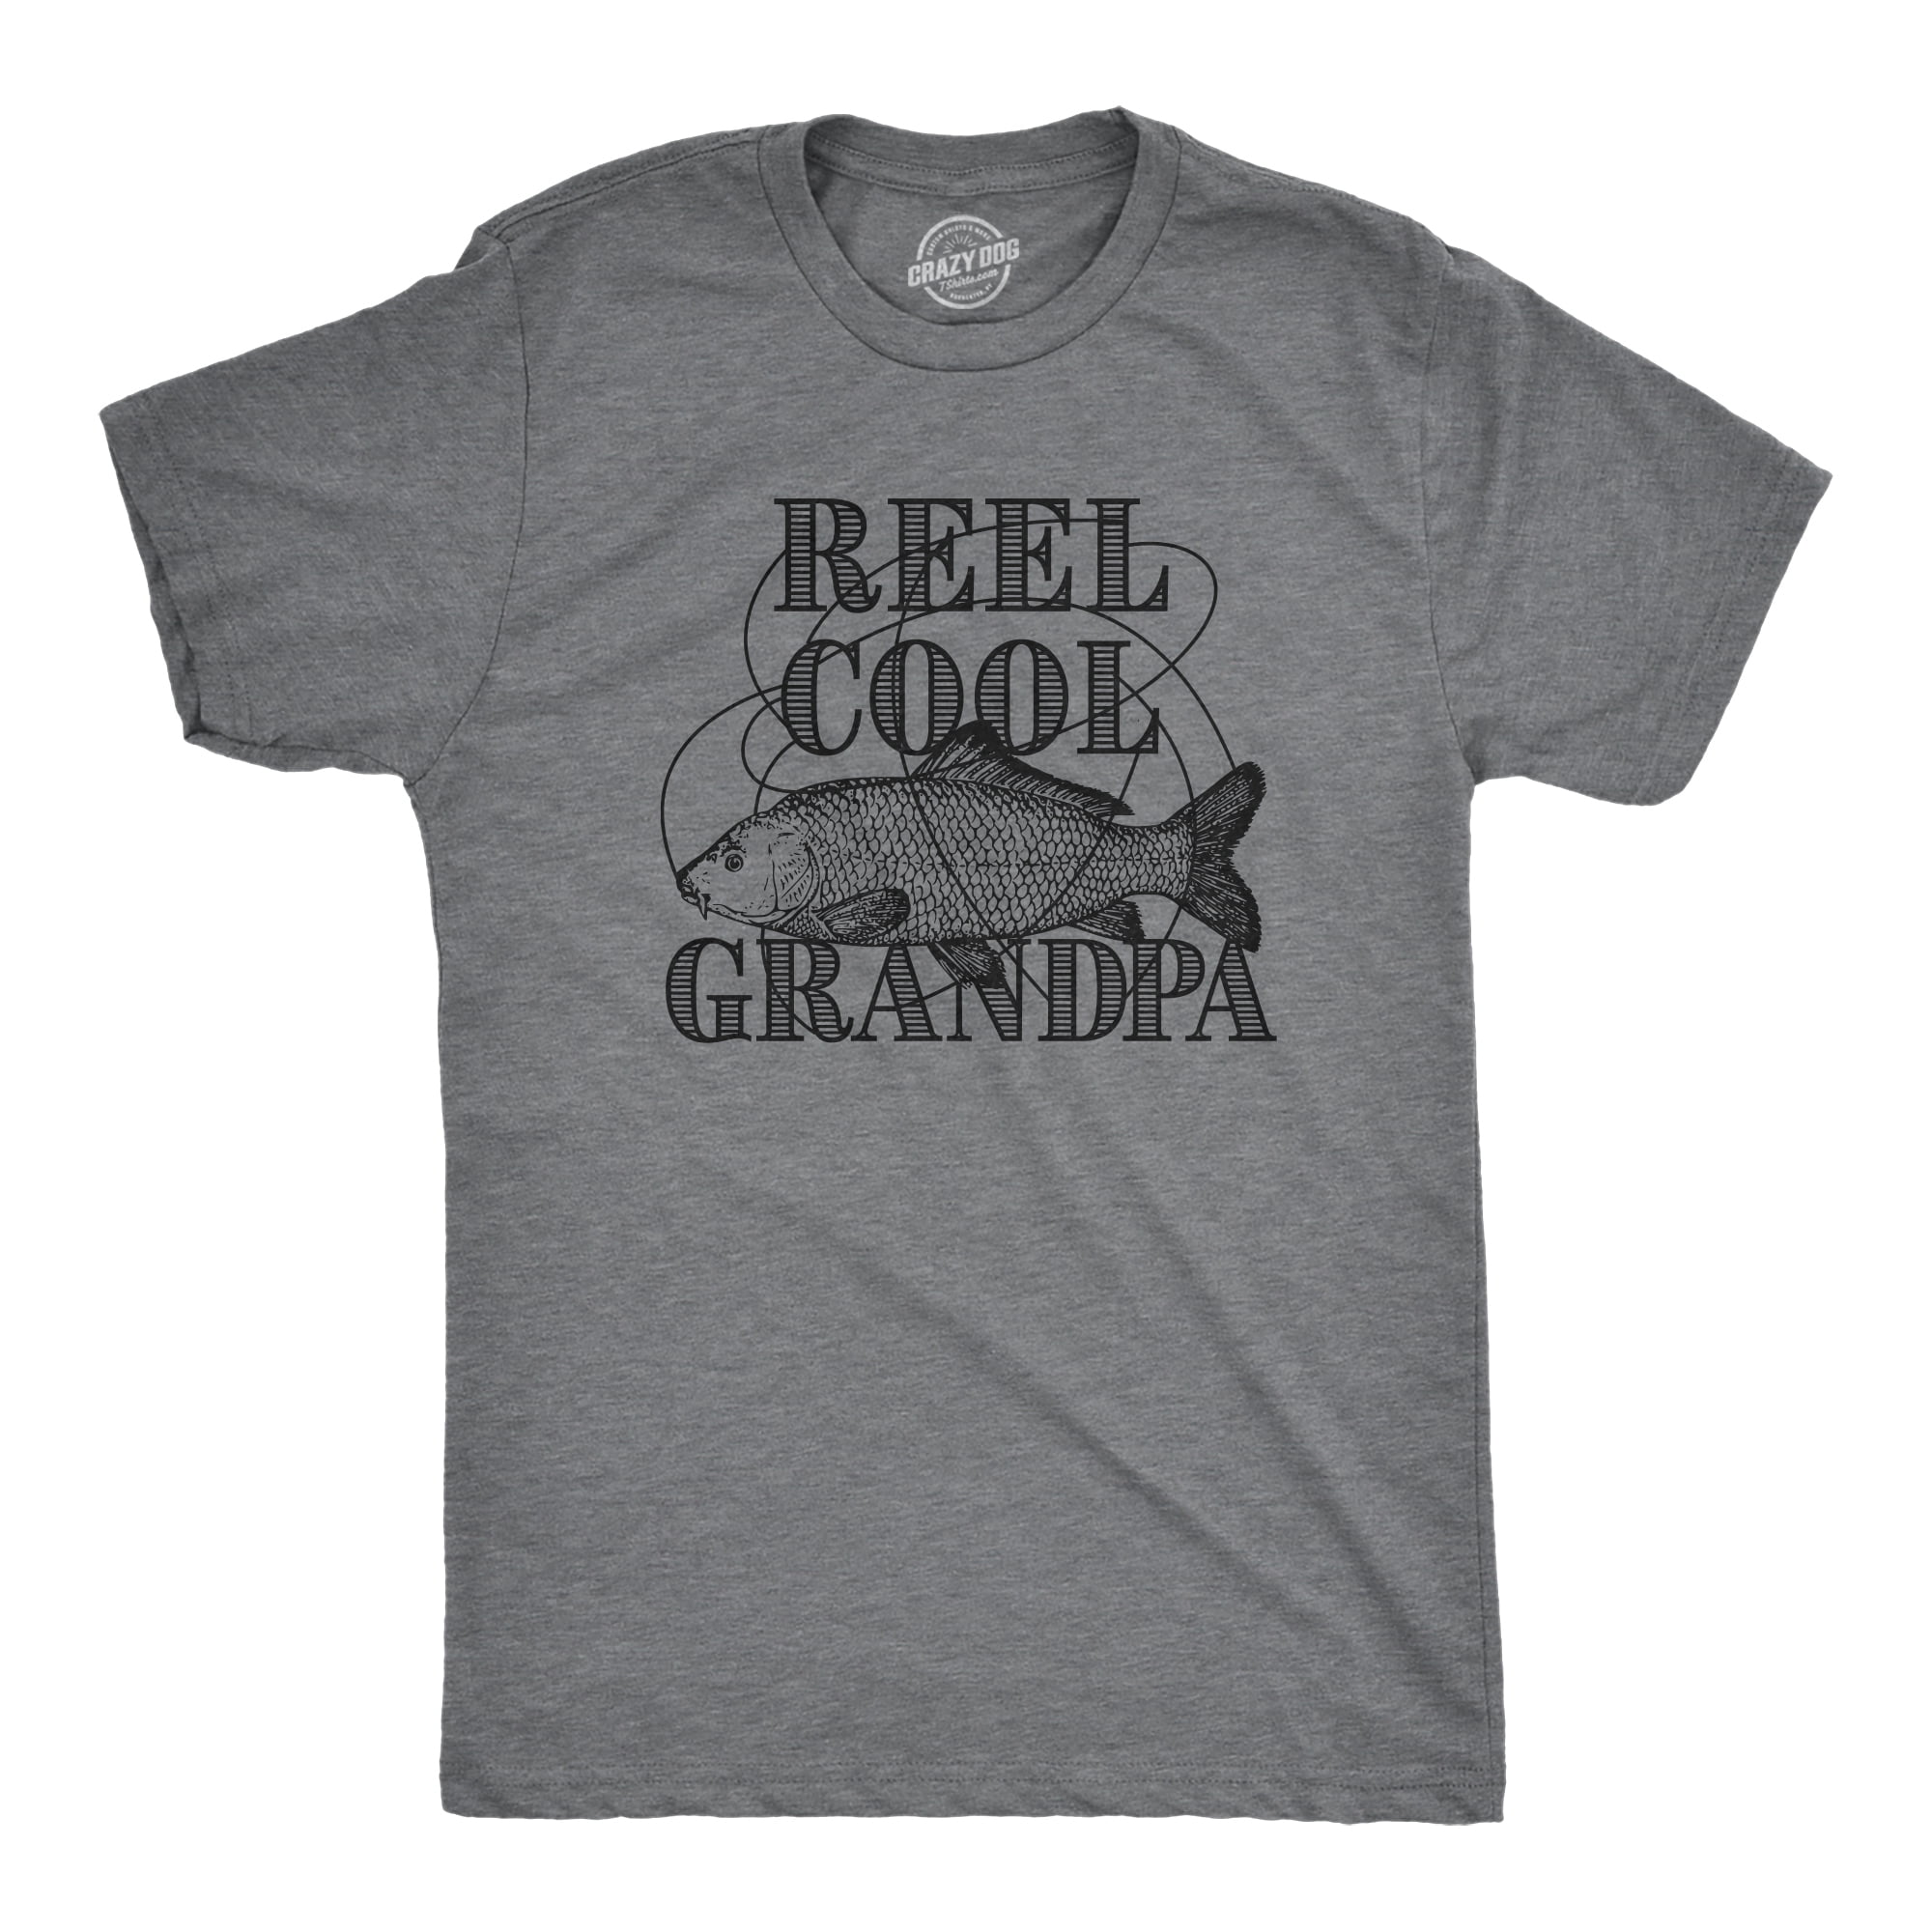 Mens Reel Cool Grandpa T shirt Funny Graphic Novelty Fishing Tee For  Fathers Day Graphic Tees